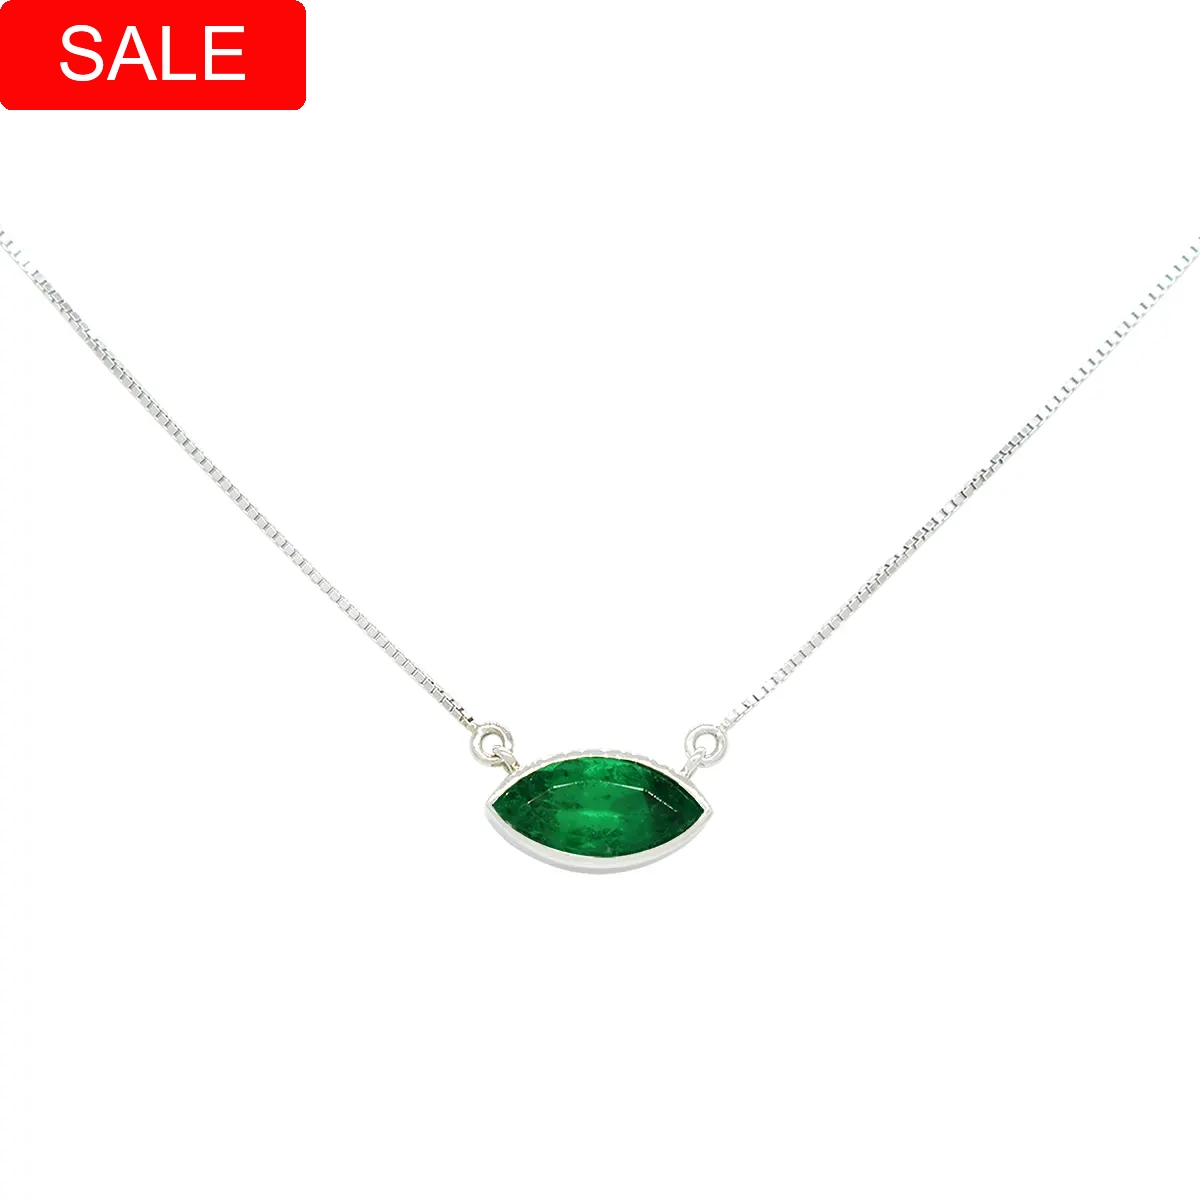 Emerald necklace in 18K white gold with a 0.70 Ct. weight dark green color marquise shape natural Colombian emerald set in delicate bezel setting